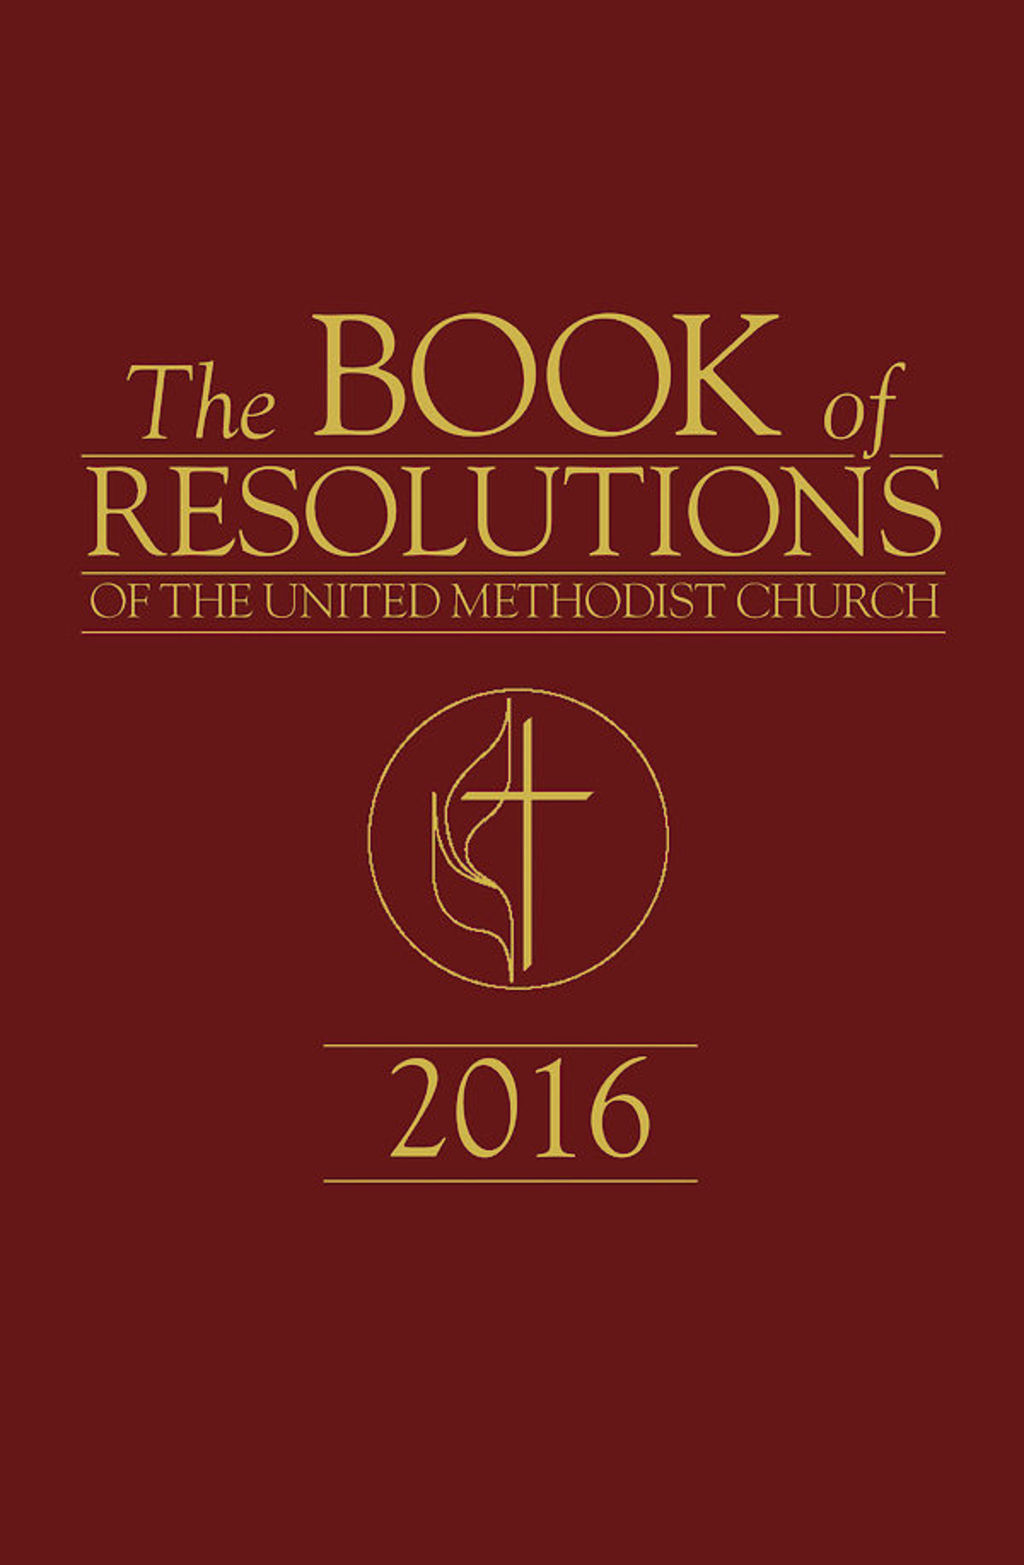 The Book of Resolutions of The United Methodist Church 2016 (eBook) - United Methodist Church,